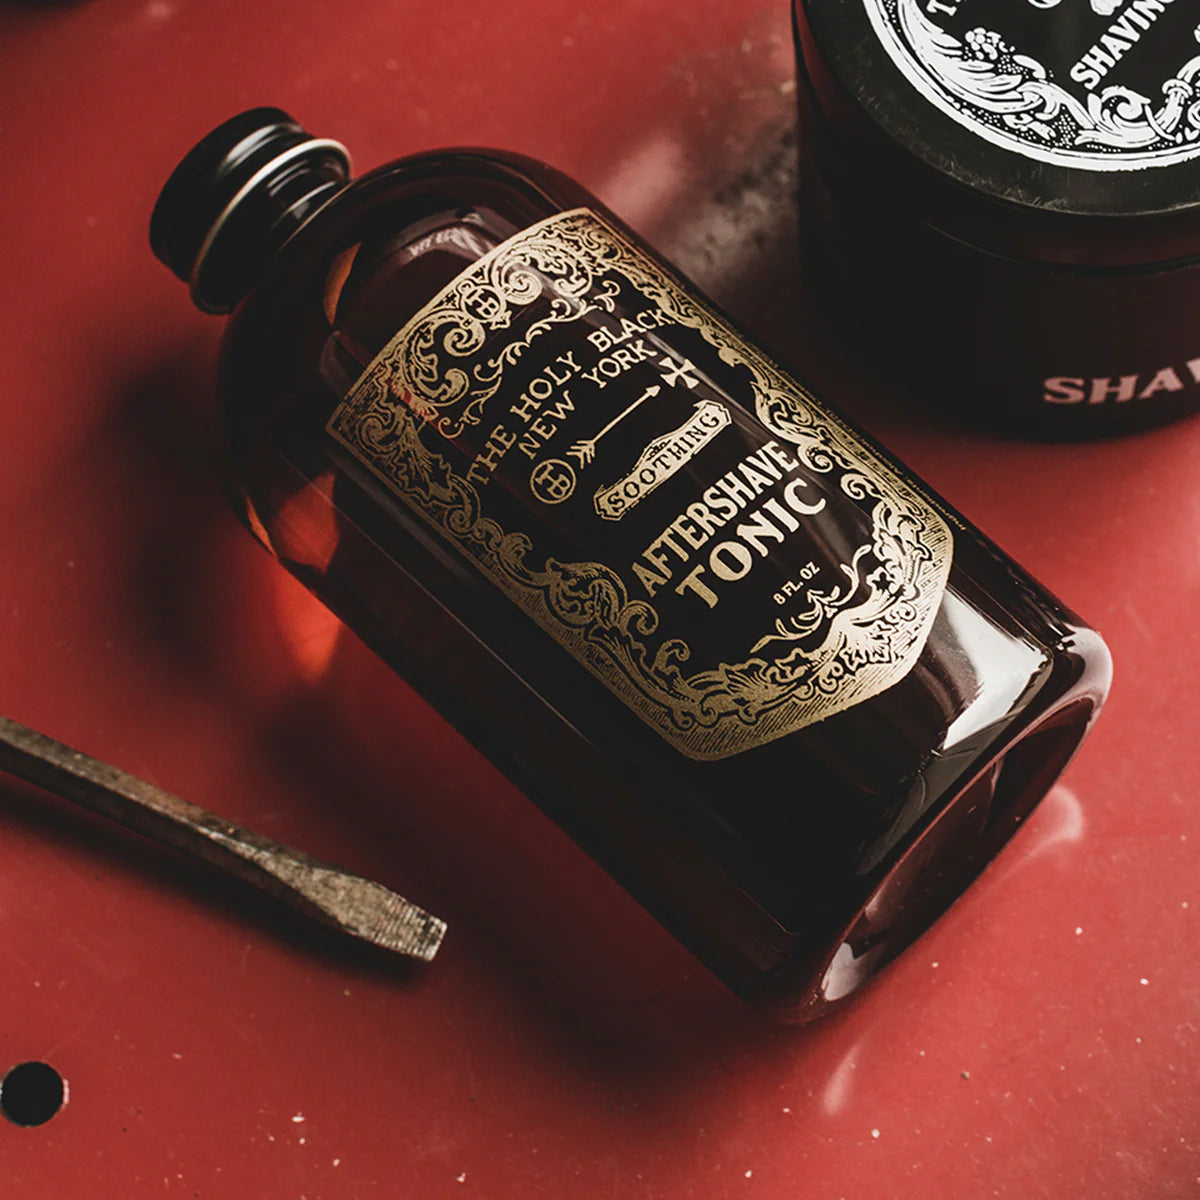 The Holy Black Aftershave Tonic